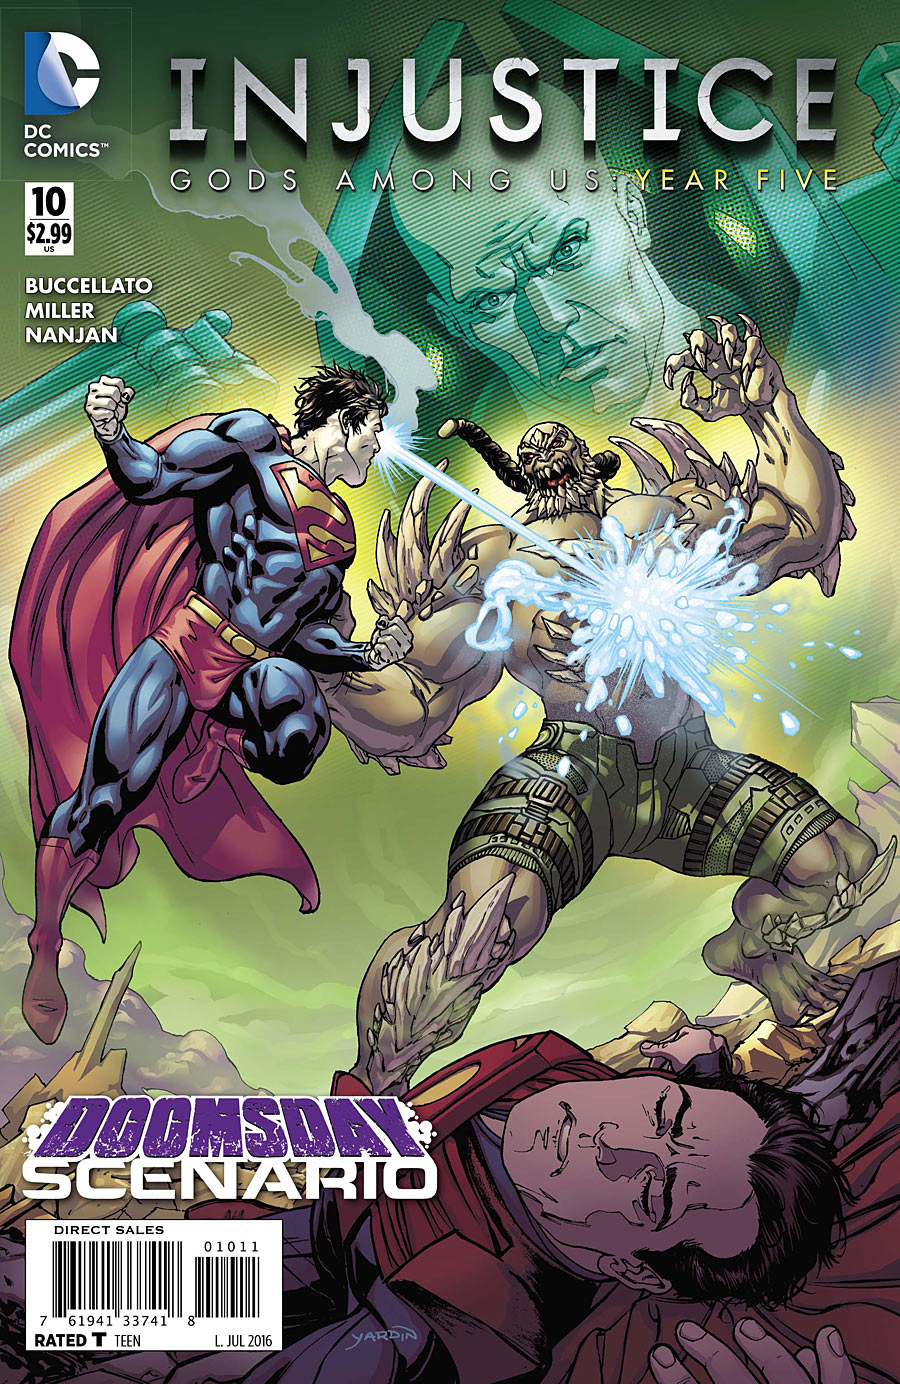 INJUSTICE GODS AMONG US YEAR FIVE #10